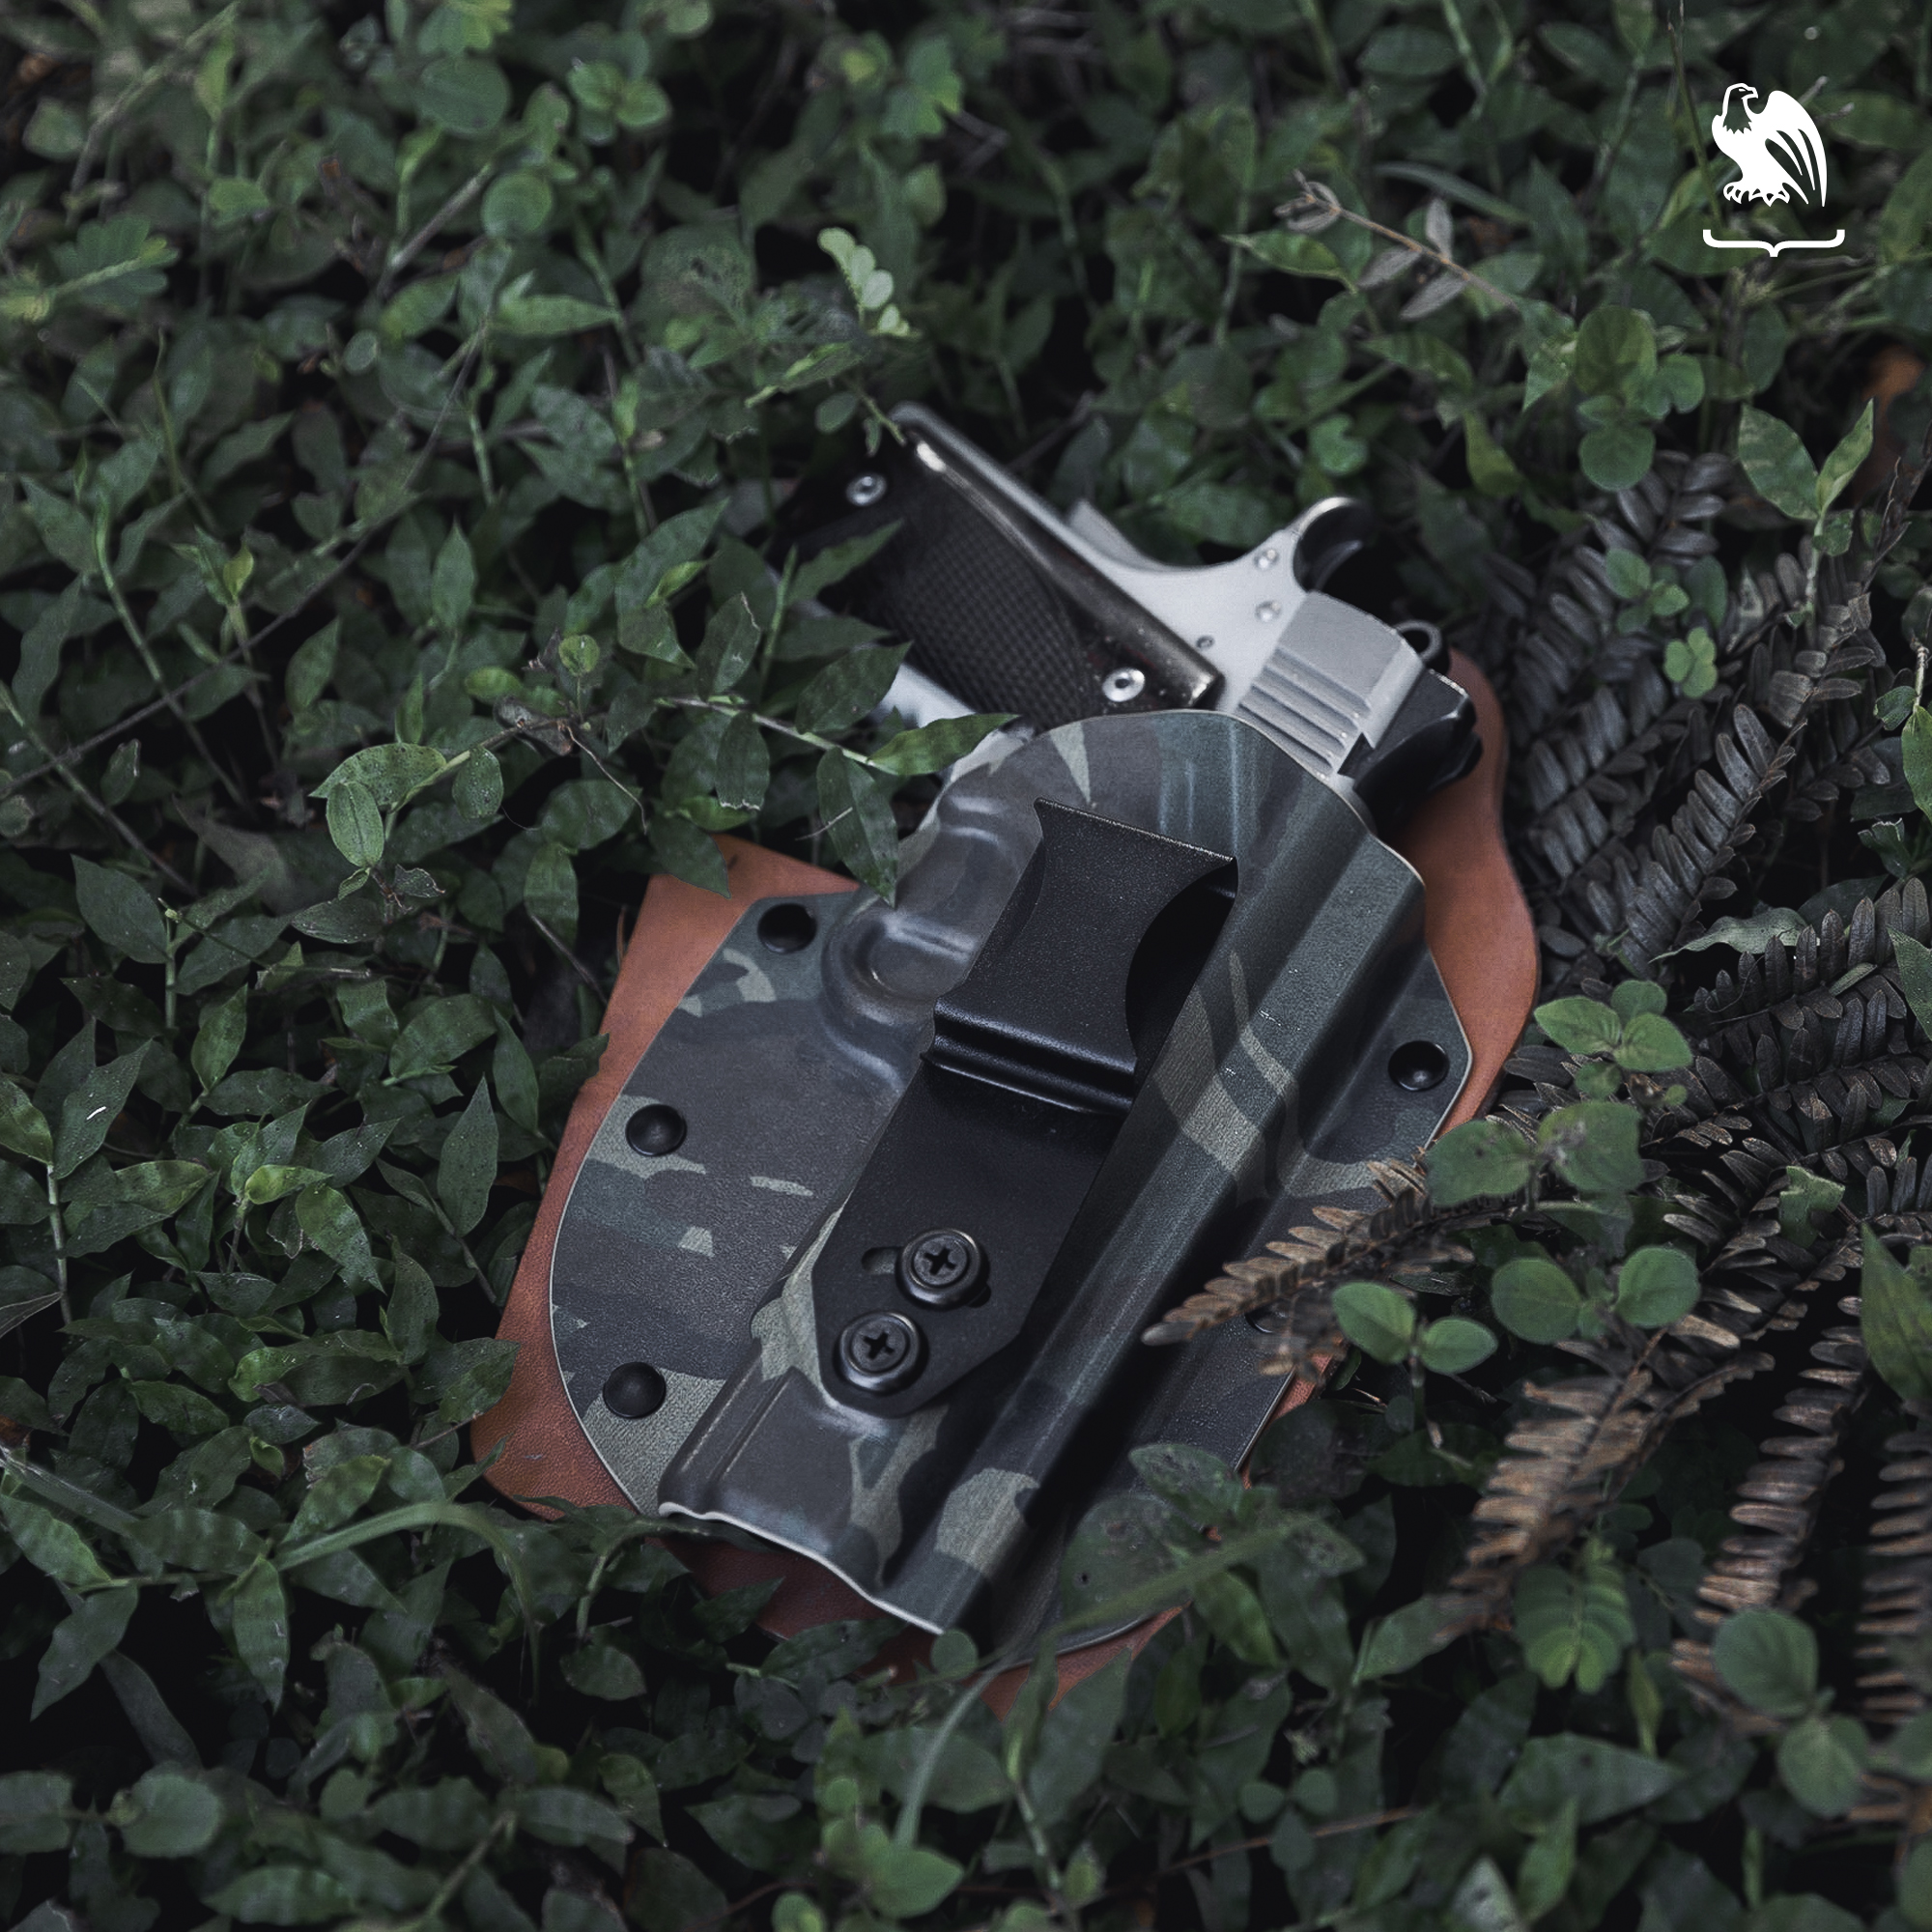 Camo colored holster from Vedder Holsters laying on the grass. 